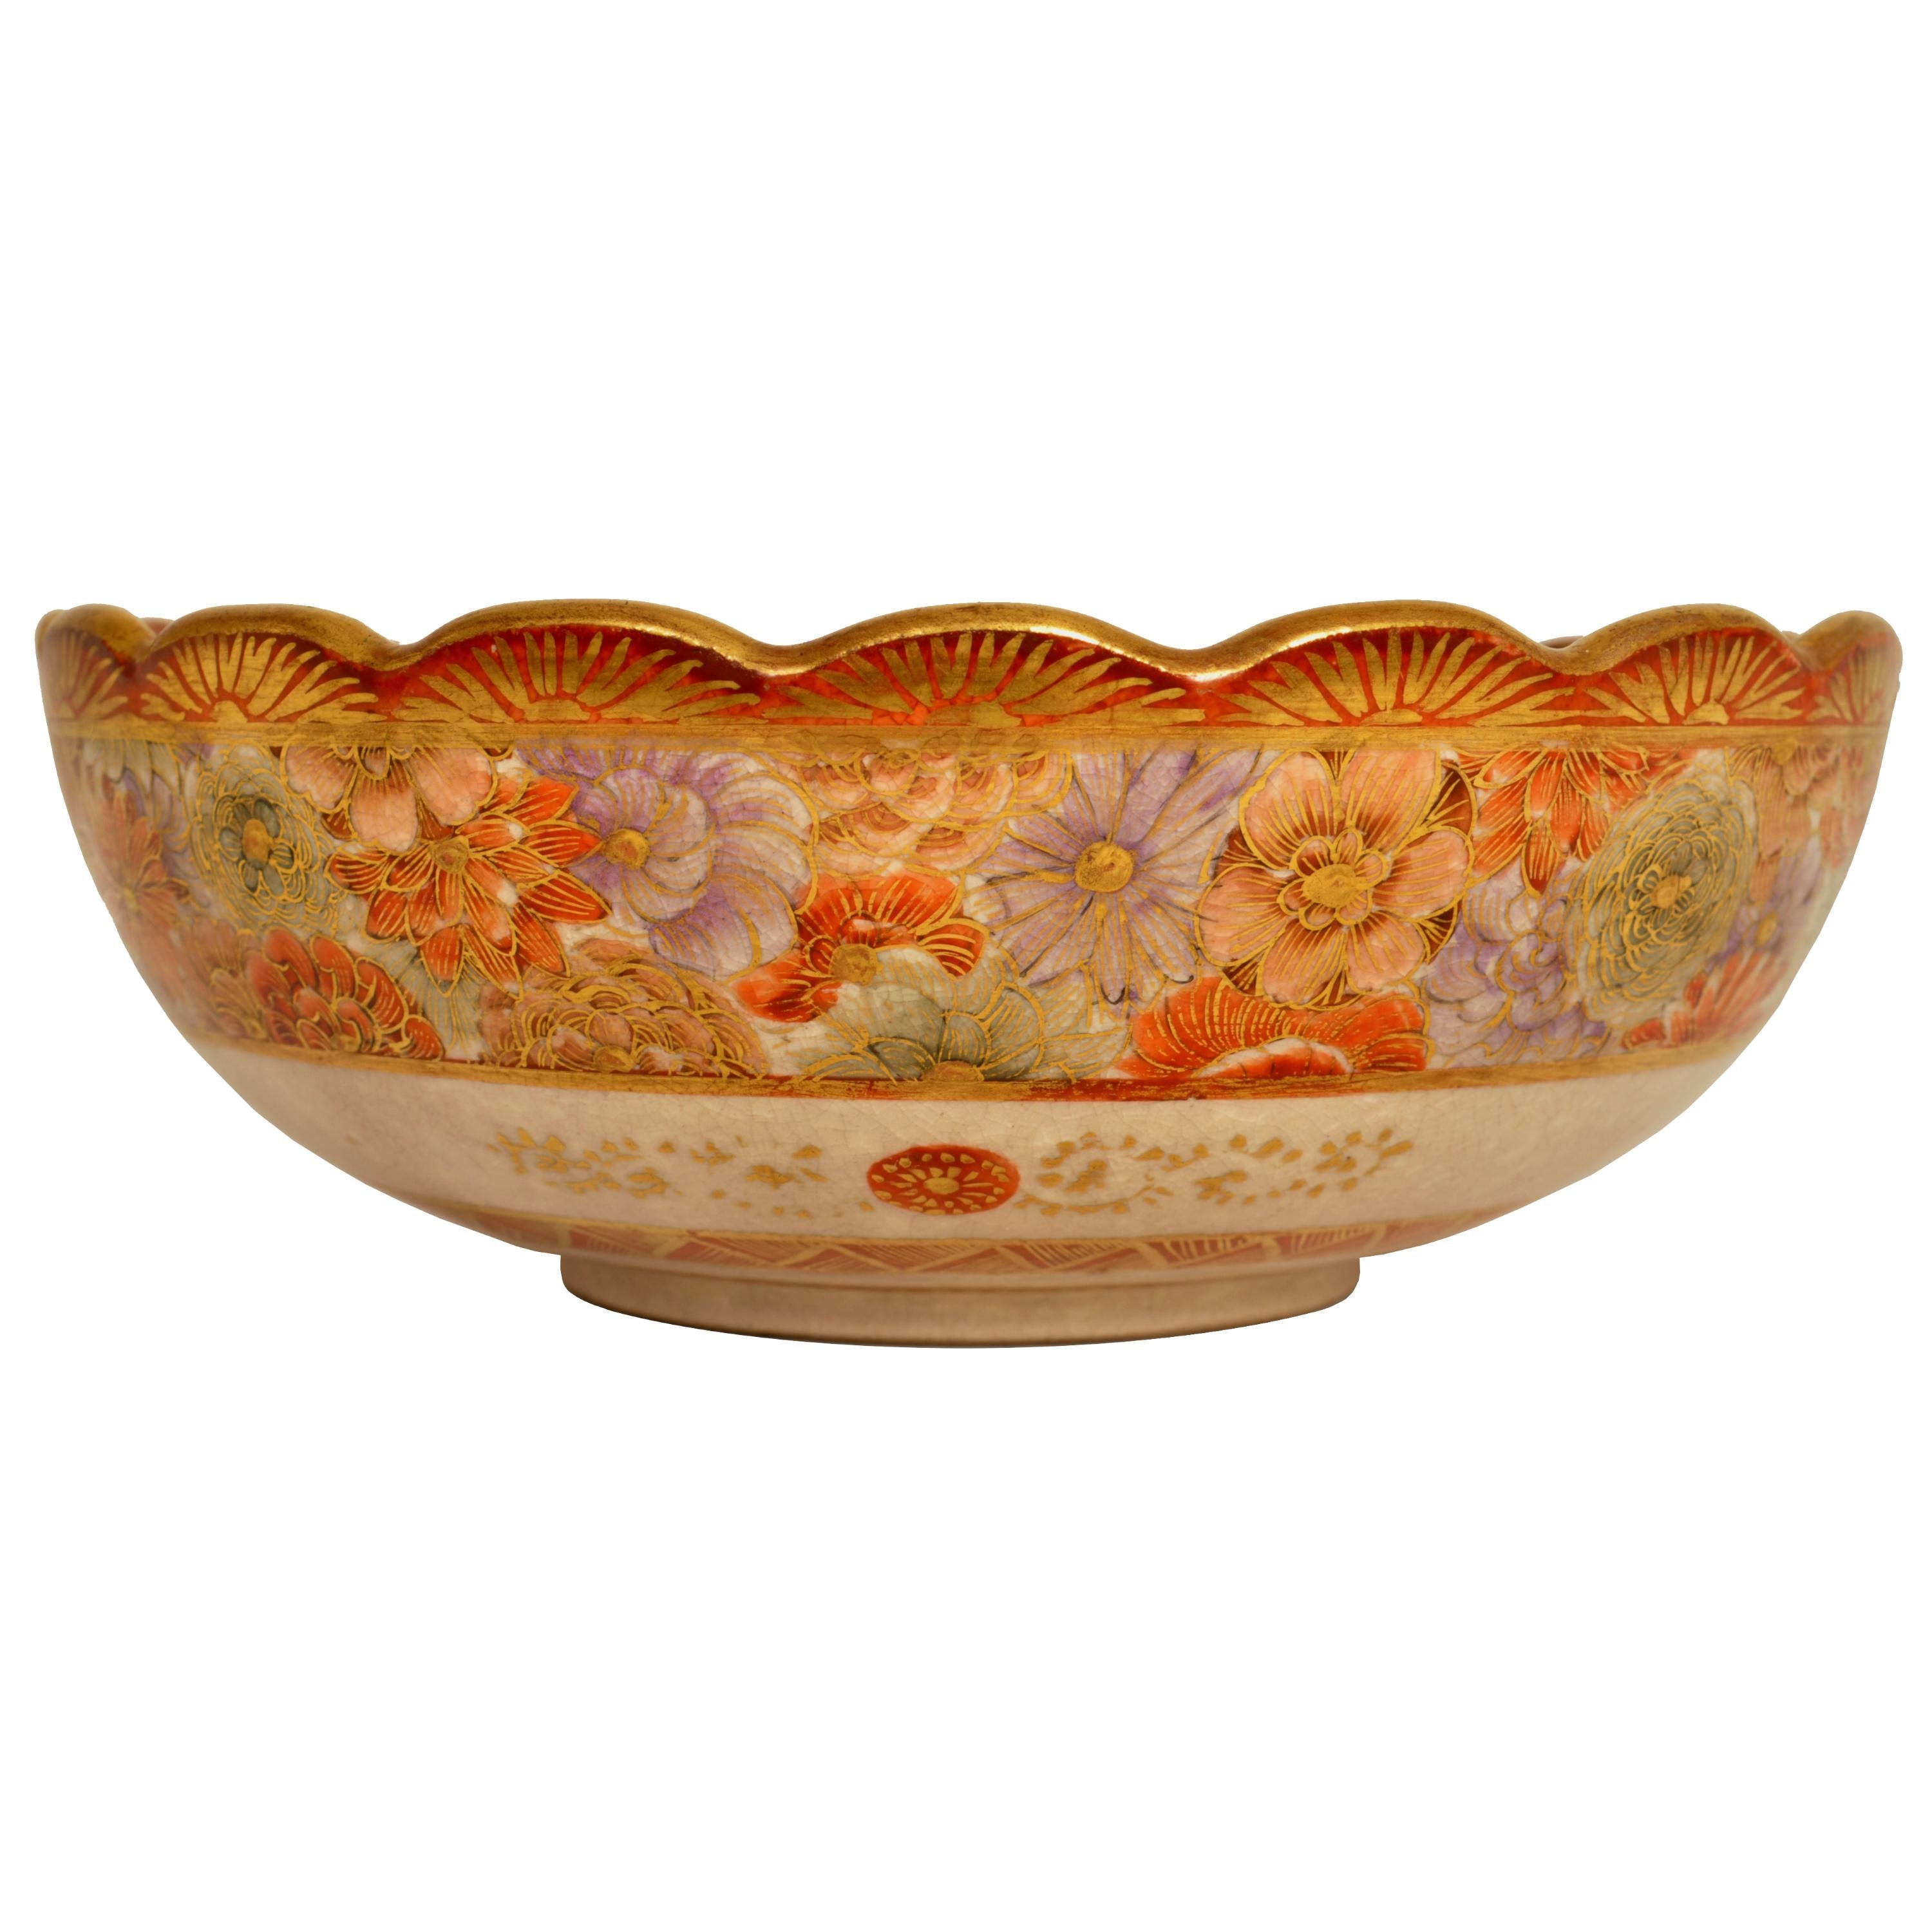 Antique Japanese Meiji Period Satsuma Pottery Bowl Imperial Figures Kizan 1890 In Good Condition For Sale In Portland, OR